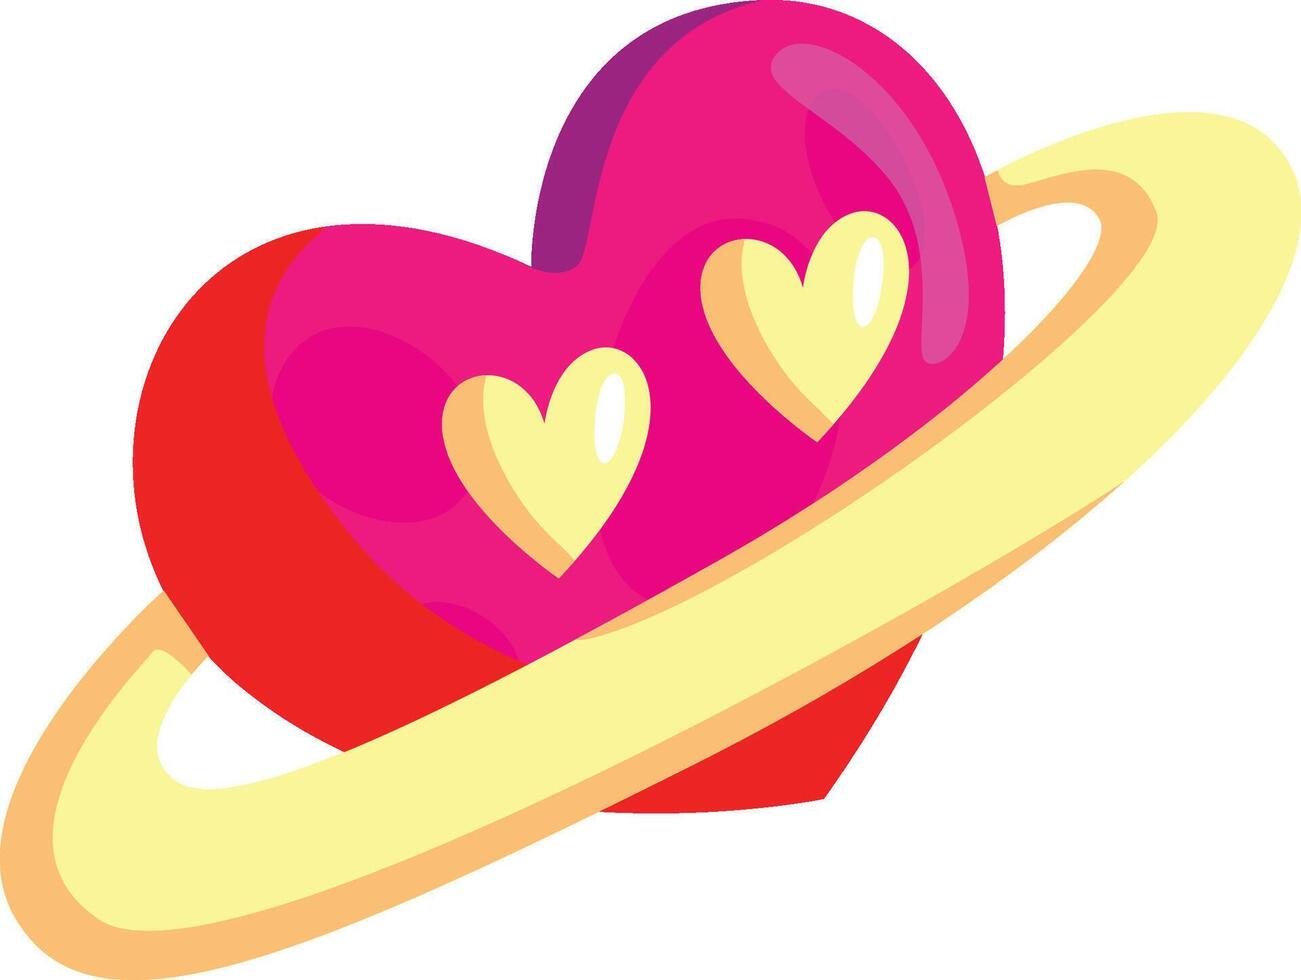 Valentine day party lover day picture vector